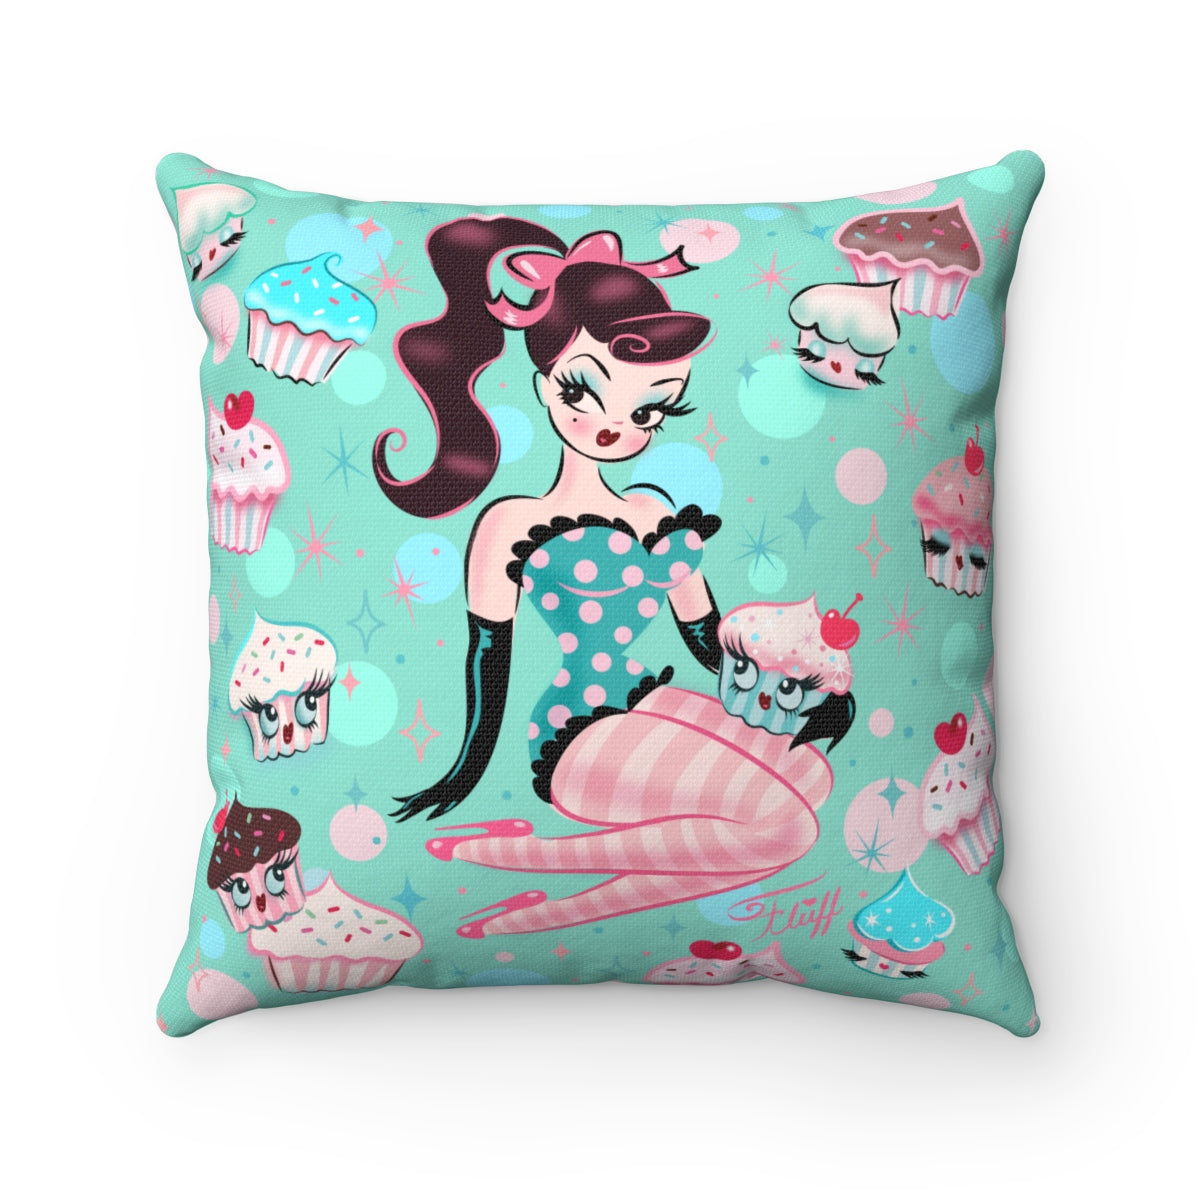 Cupcake Doll with Chocolate Hair • Square Pillow